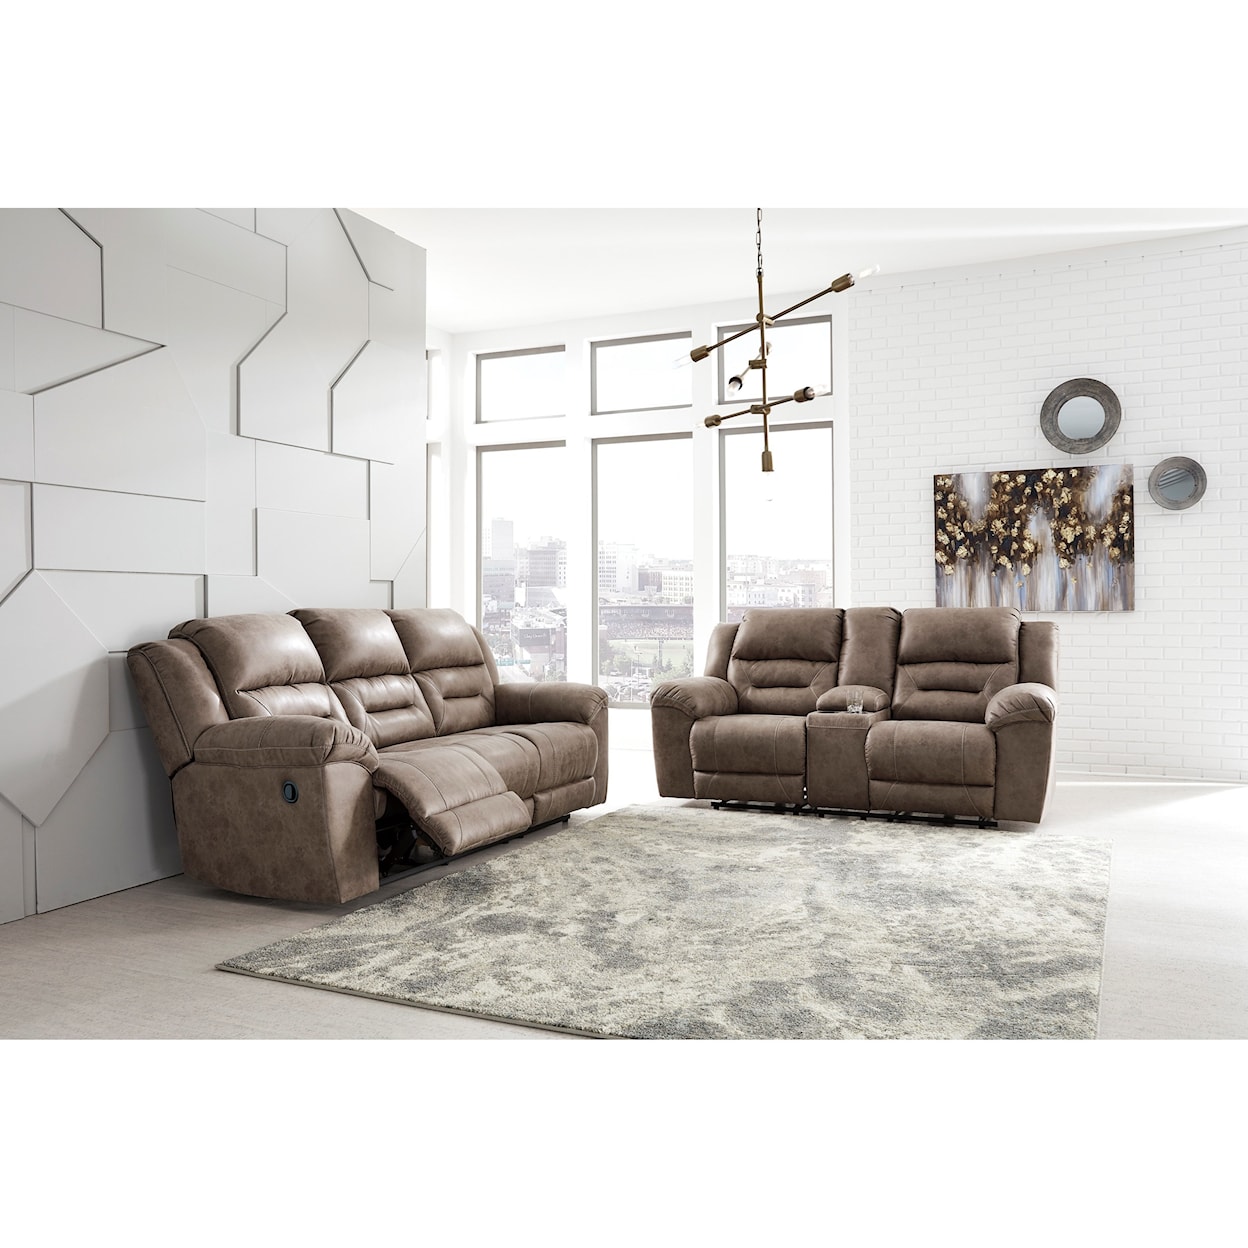 Signature Design by Ashley Furniture Stoneland Reclining Living Room Group